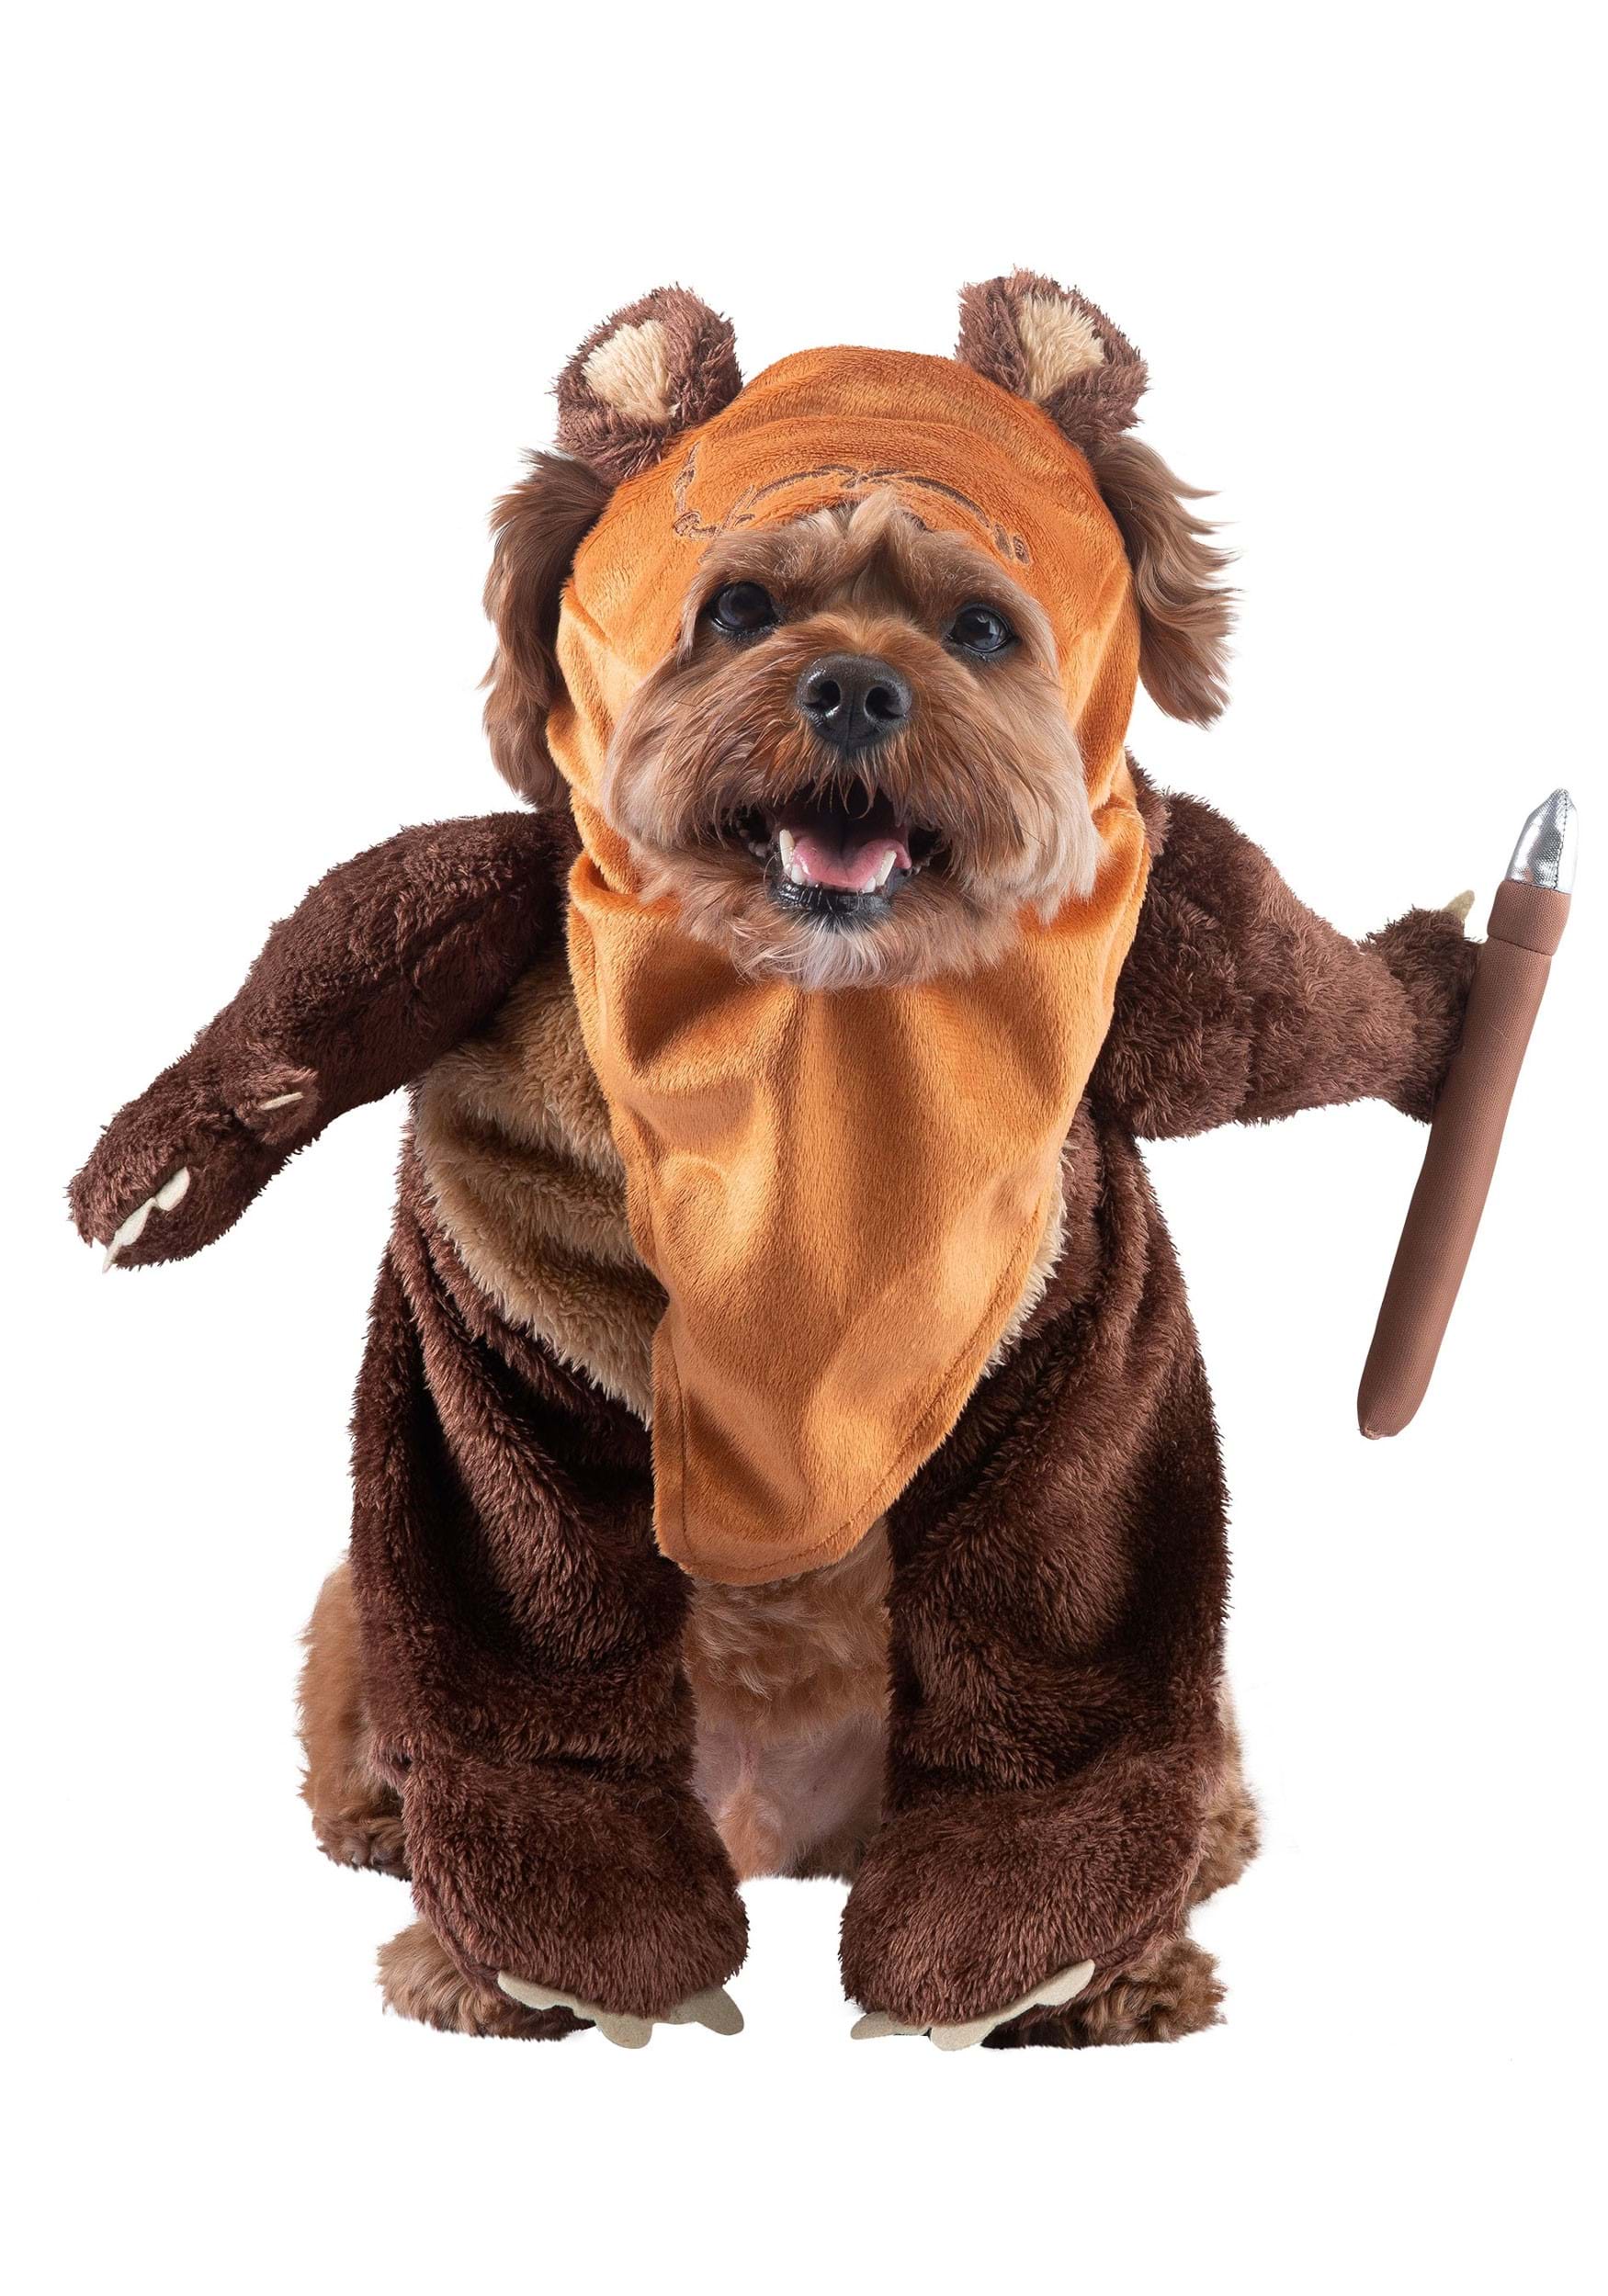 STAR WARS DELUXE EWOK WICKET COSTUME FOR DOGS